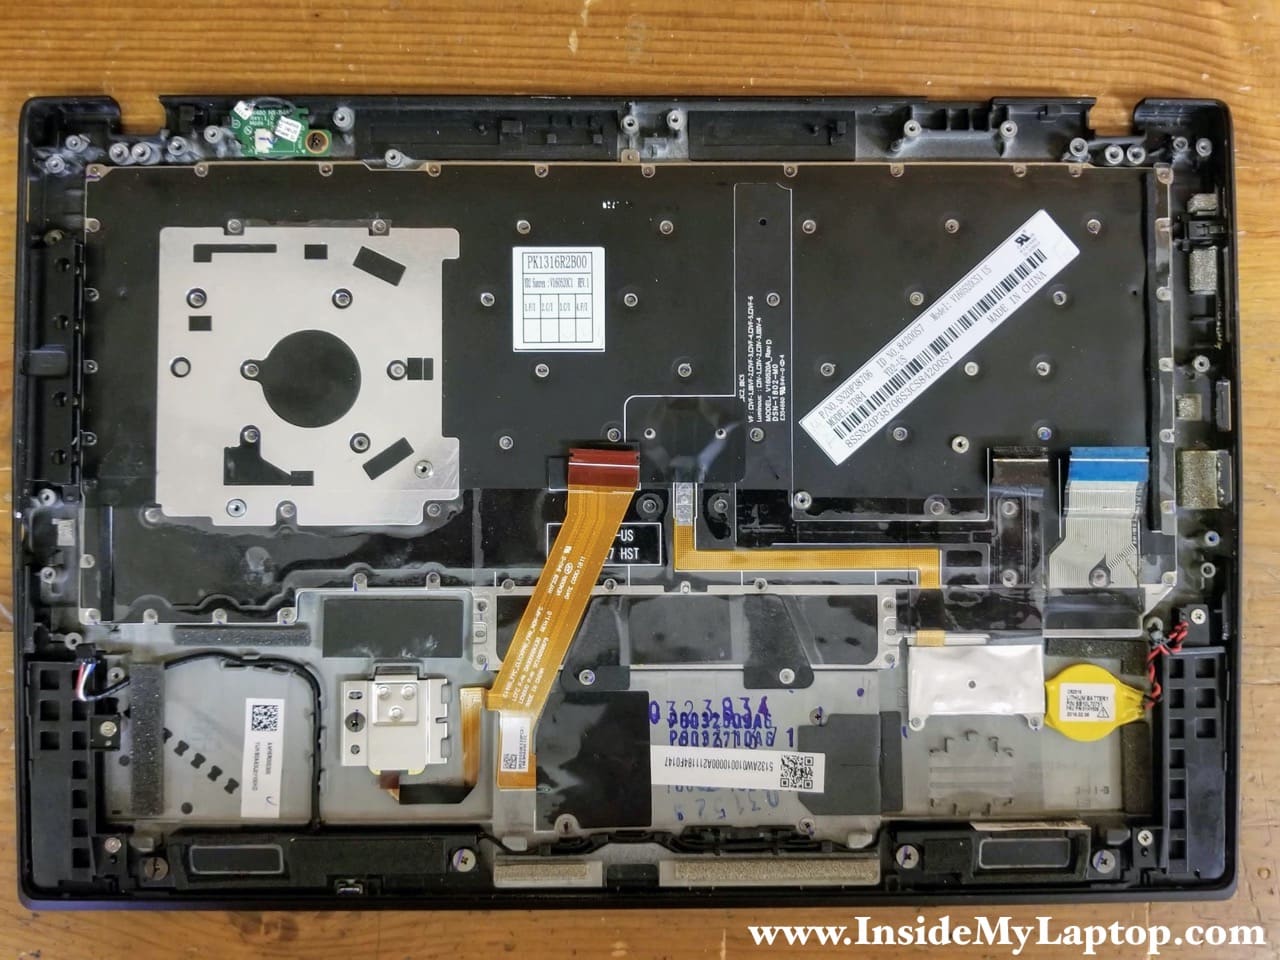 Disassembly of Lenovo ThinkPad X1 Carbon 6th Gen – Inside my laptop